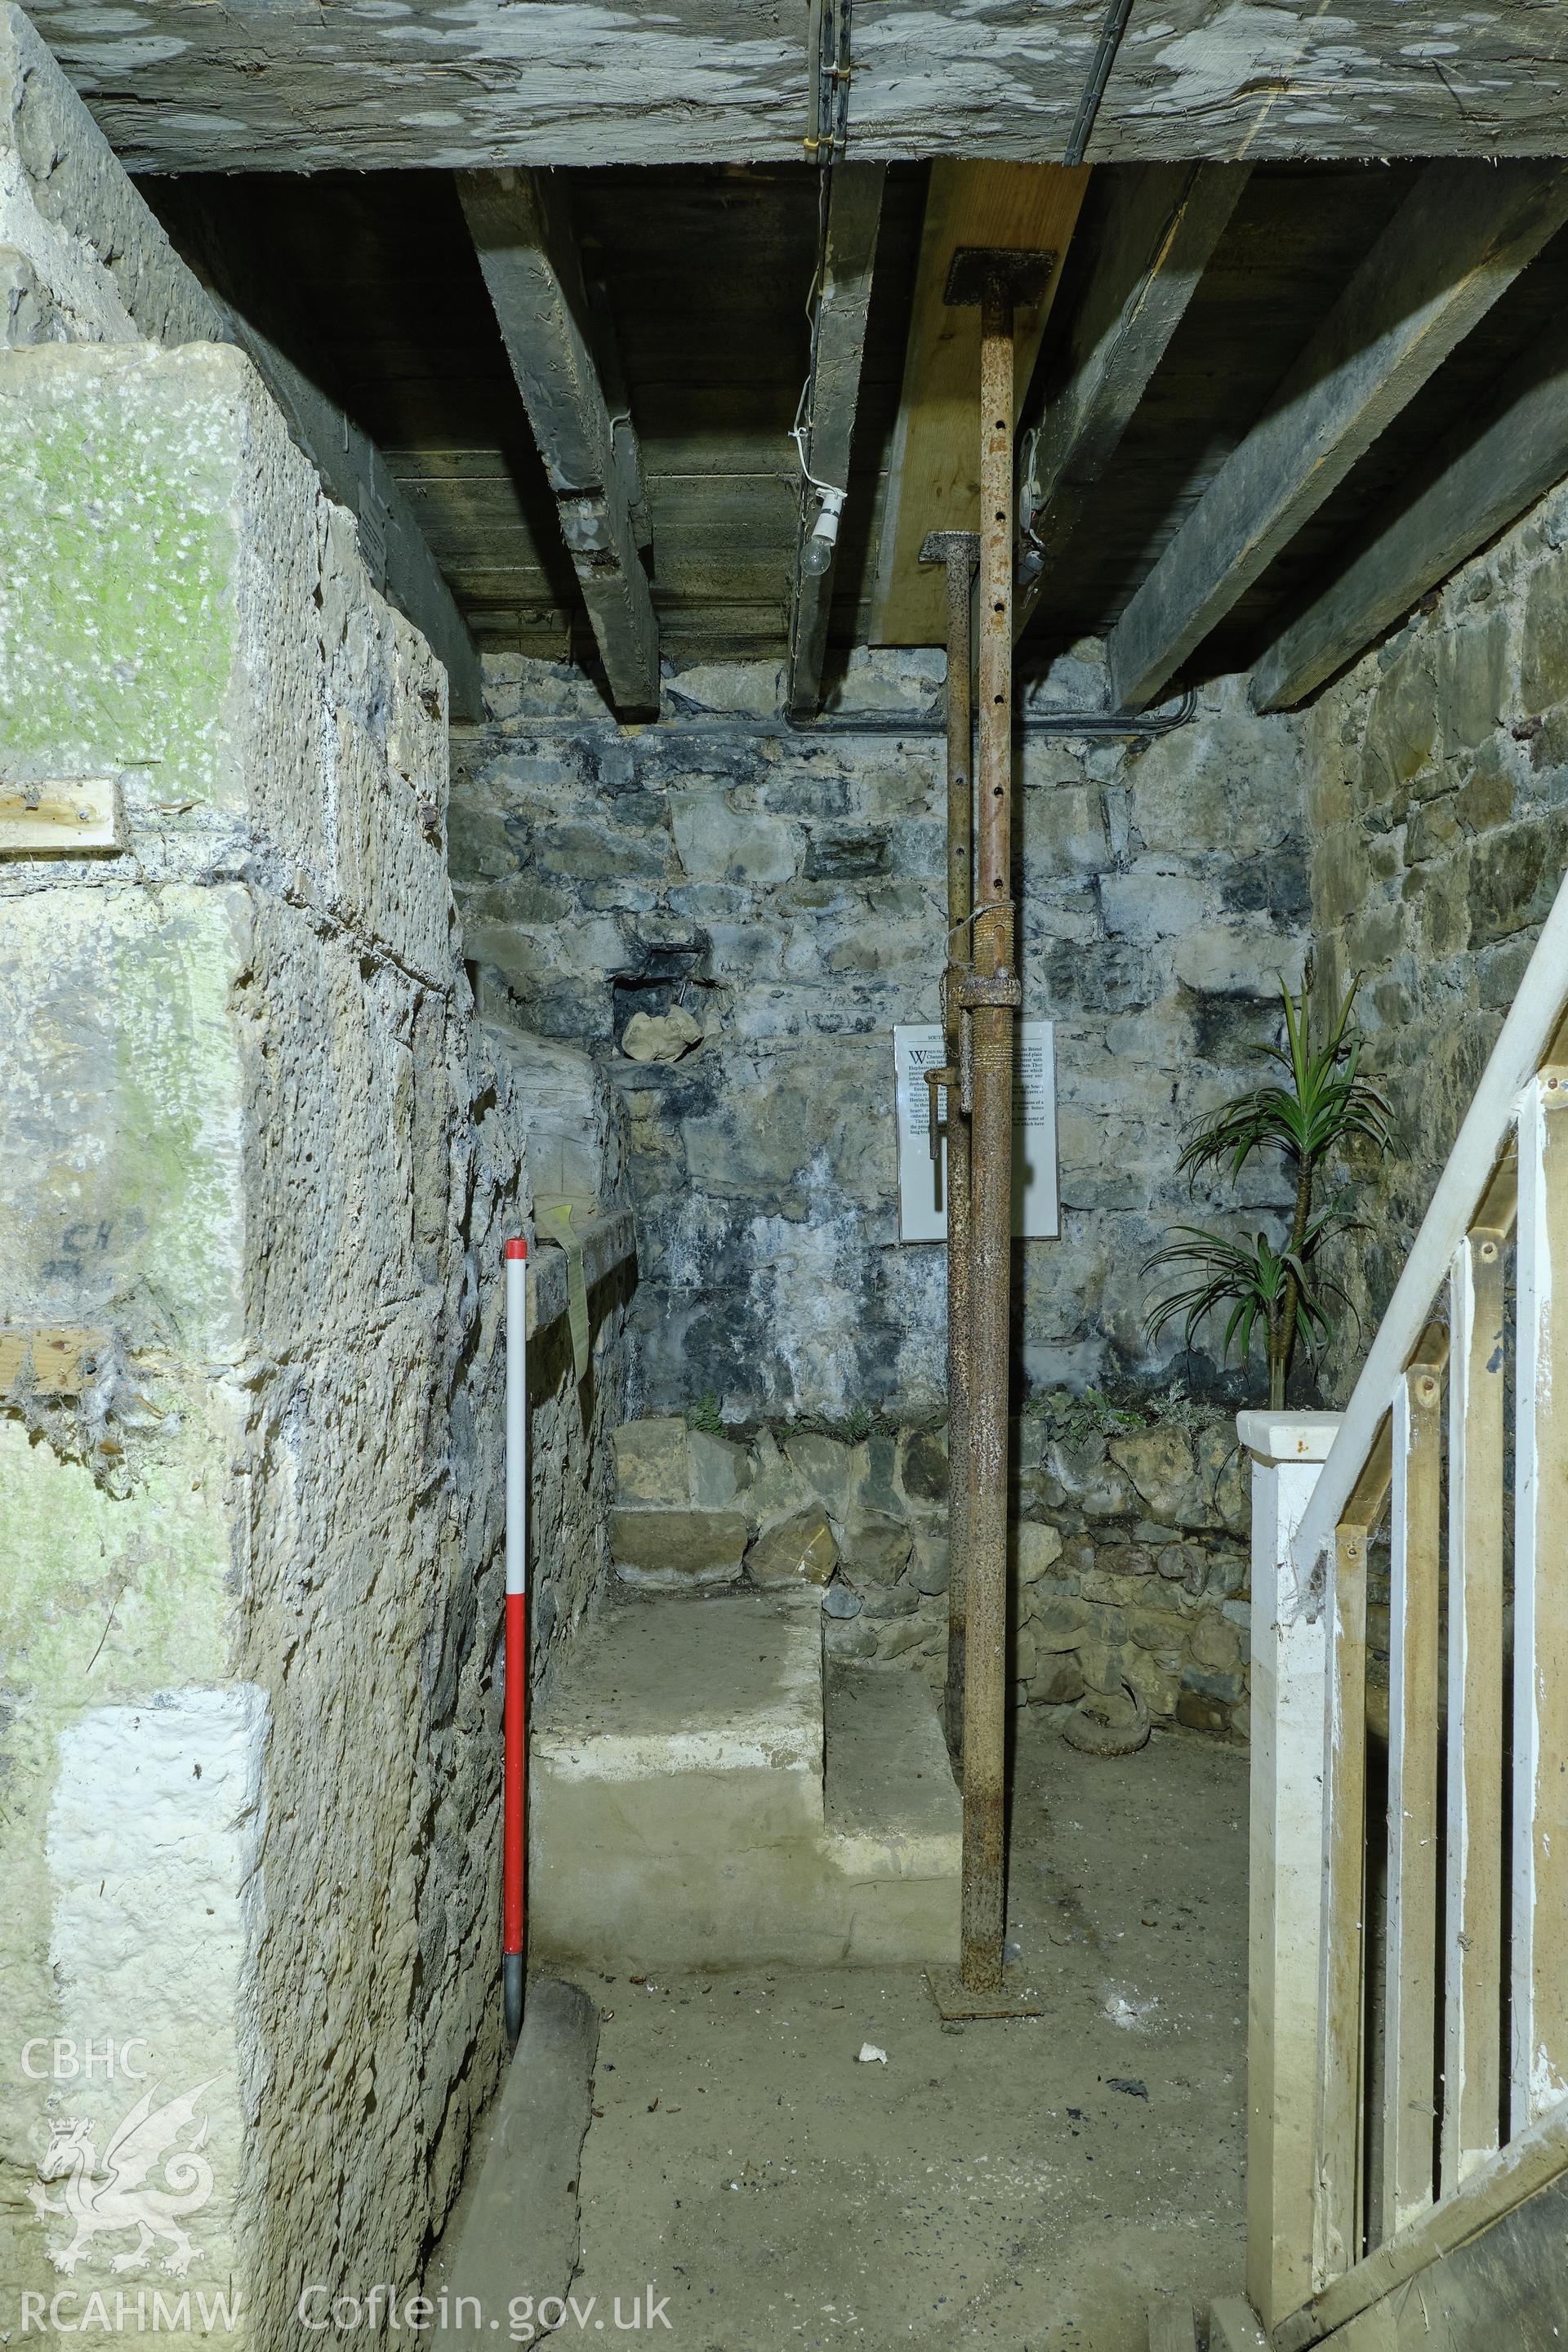 Colour photograph showing Blackpool Mill - basement, looking SE to steps by wheelpit. Produced as part of Historic Building Recording for Blackpool Mill, carried out by Richard Hayman, June 2021.